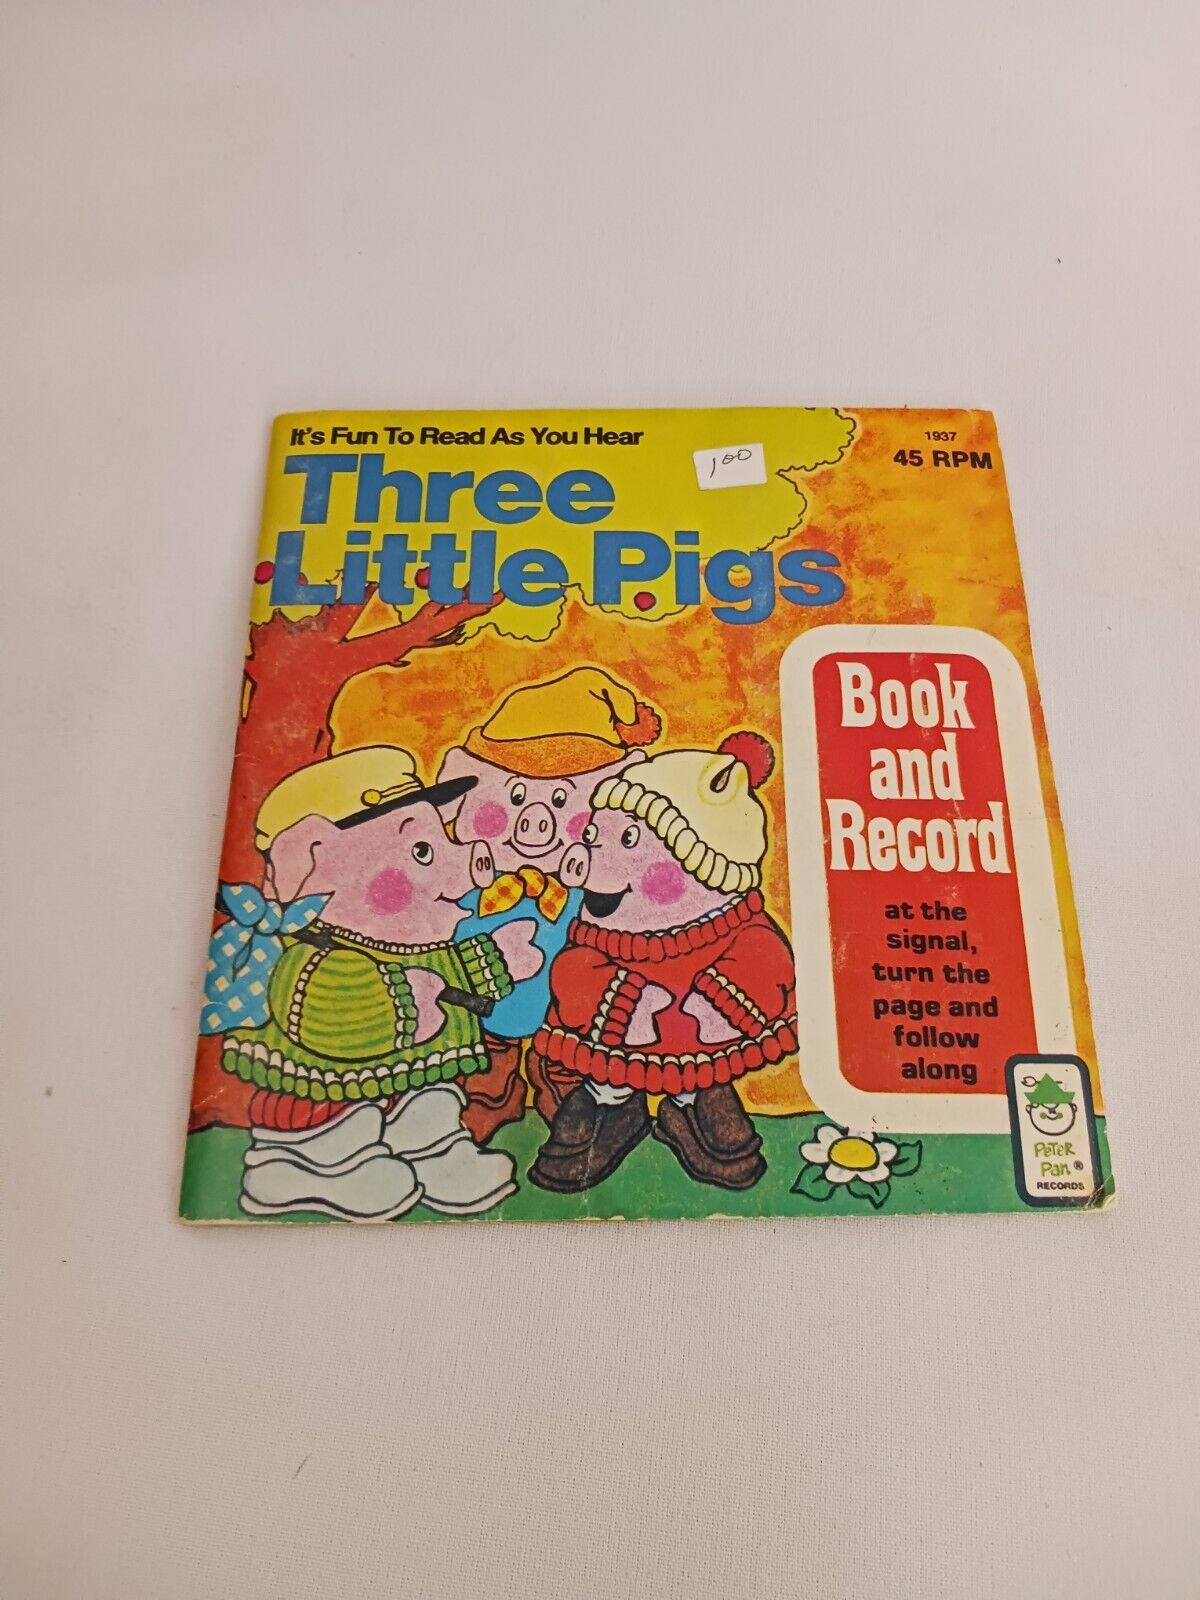 Three Little Pigs Peter Pan Records Book And Record 45 RPM 7\